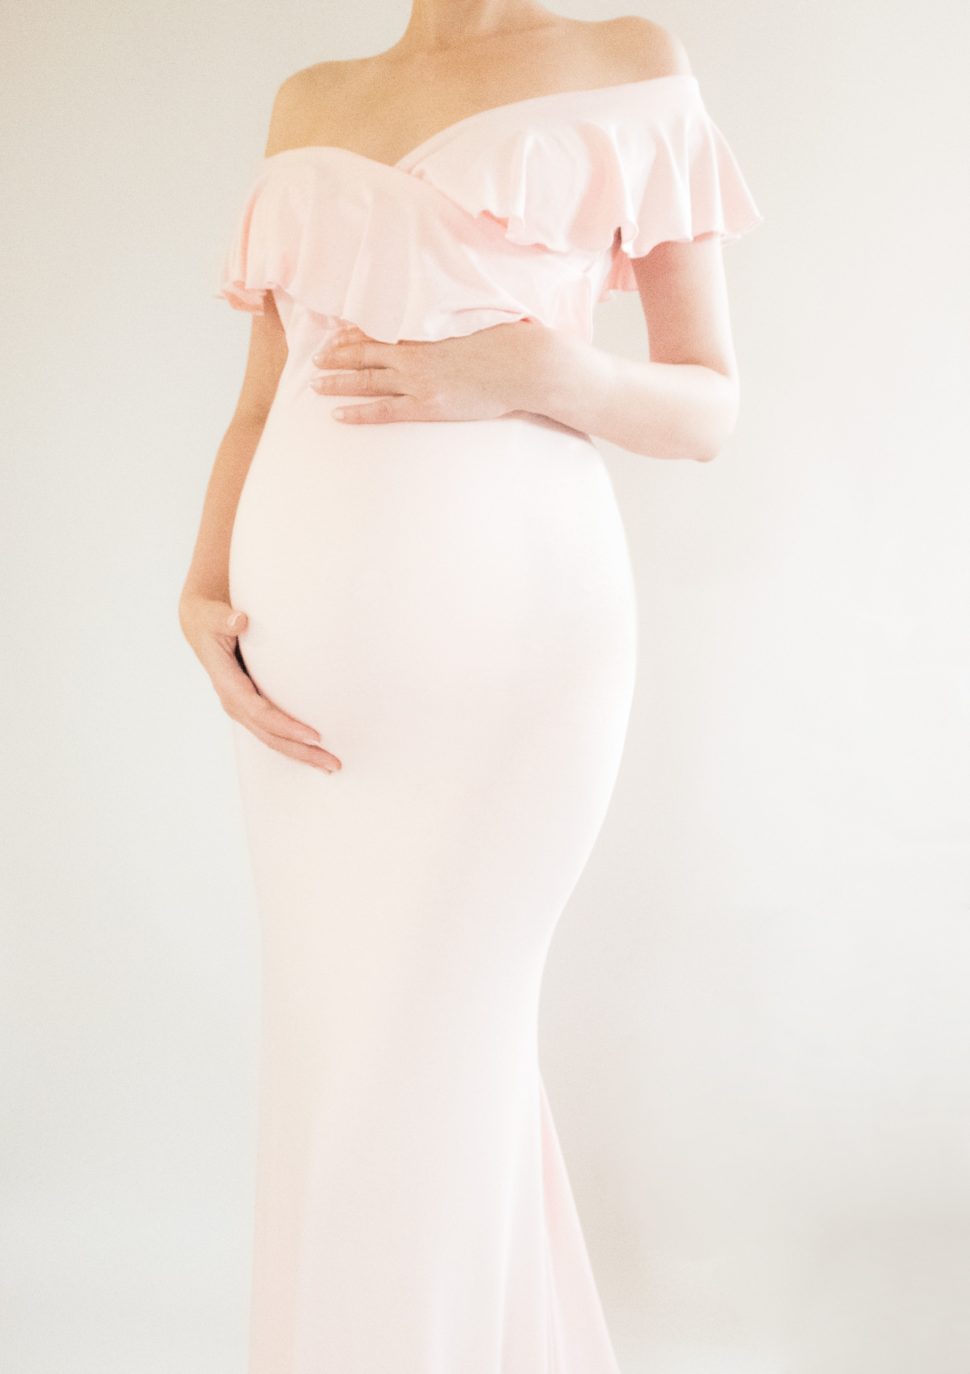 Medium Size of Baby Shower:maternity Boutique Cute Maternity Dresses For Baby Shower Affordable Maternity Dresses For Baby Shower What To Wear To My Baby Shower Pink Maternity Dress Baby Shower Attire For Mom Maternity Gown Style Maternity Gowns For Photography